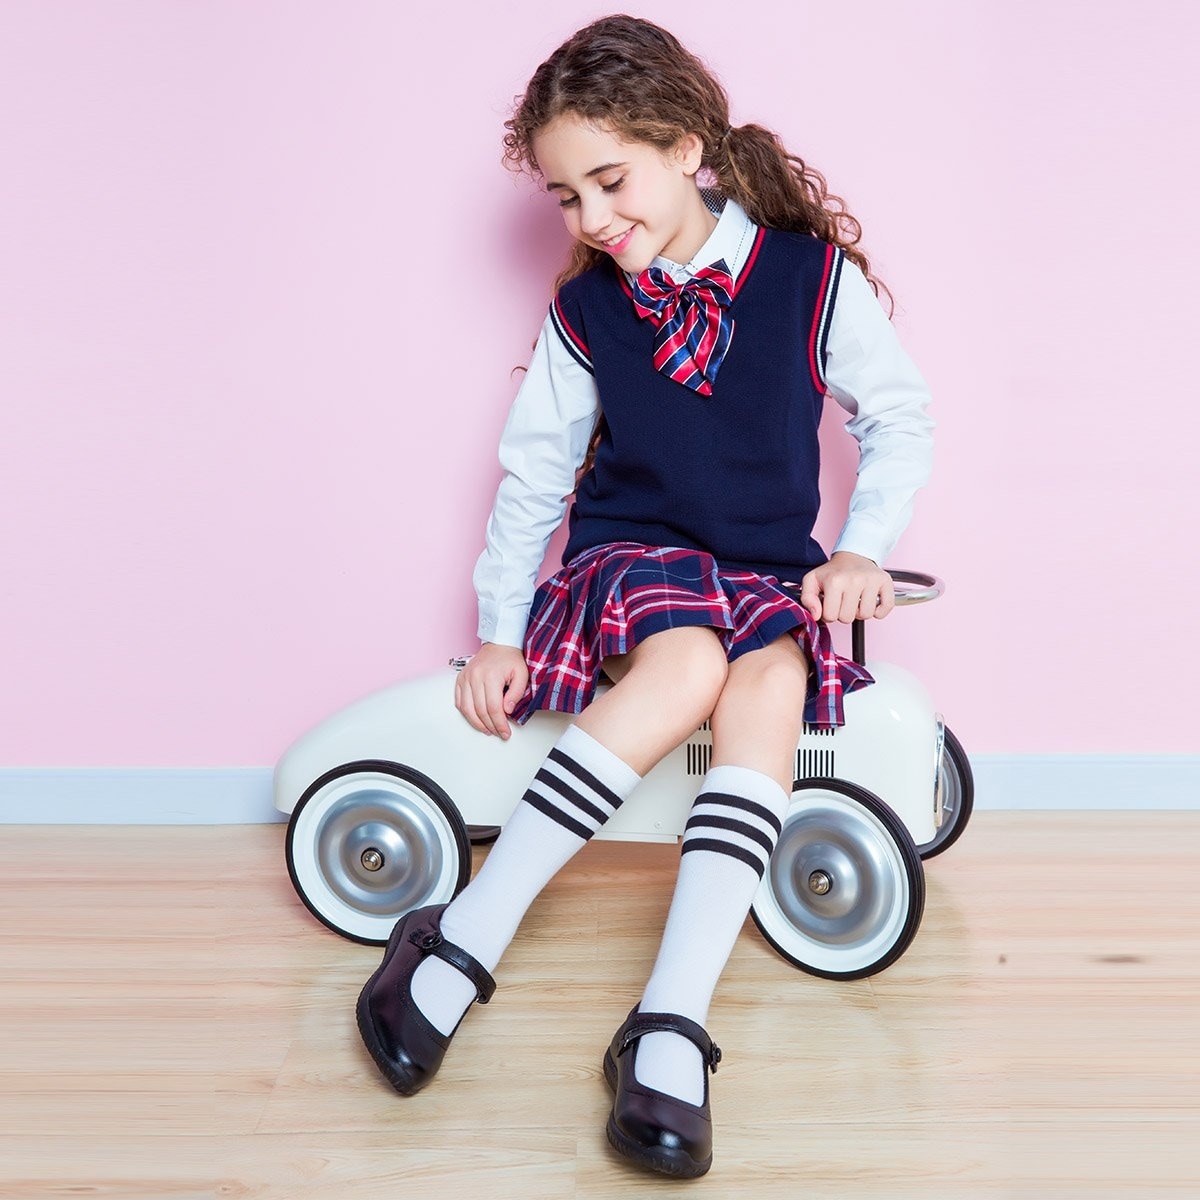 navy blue mary jane school shoes